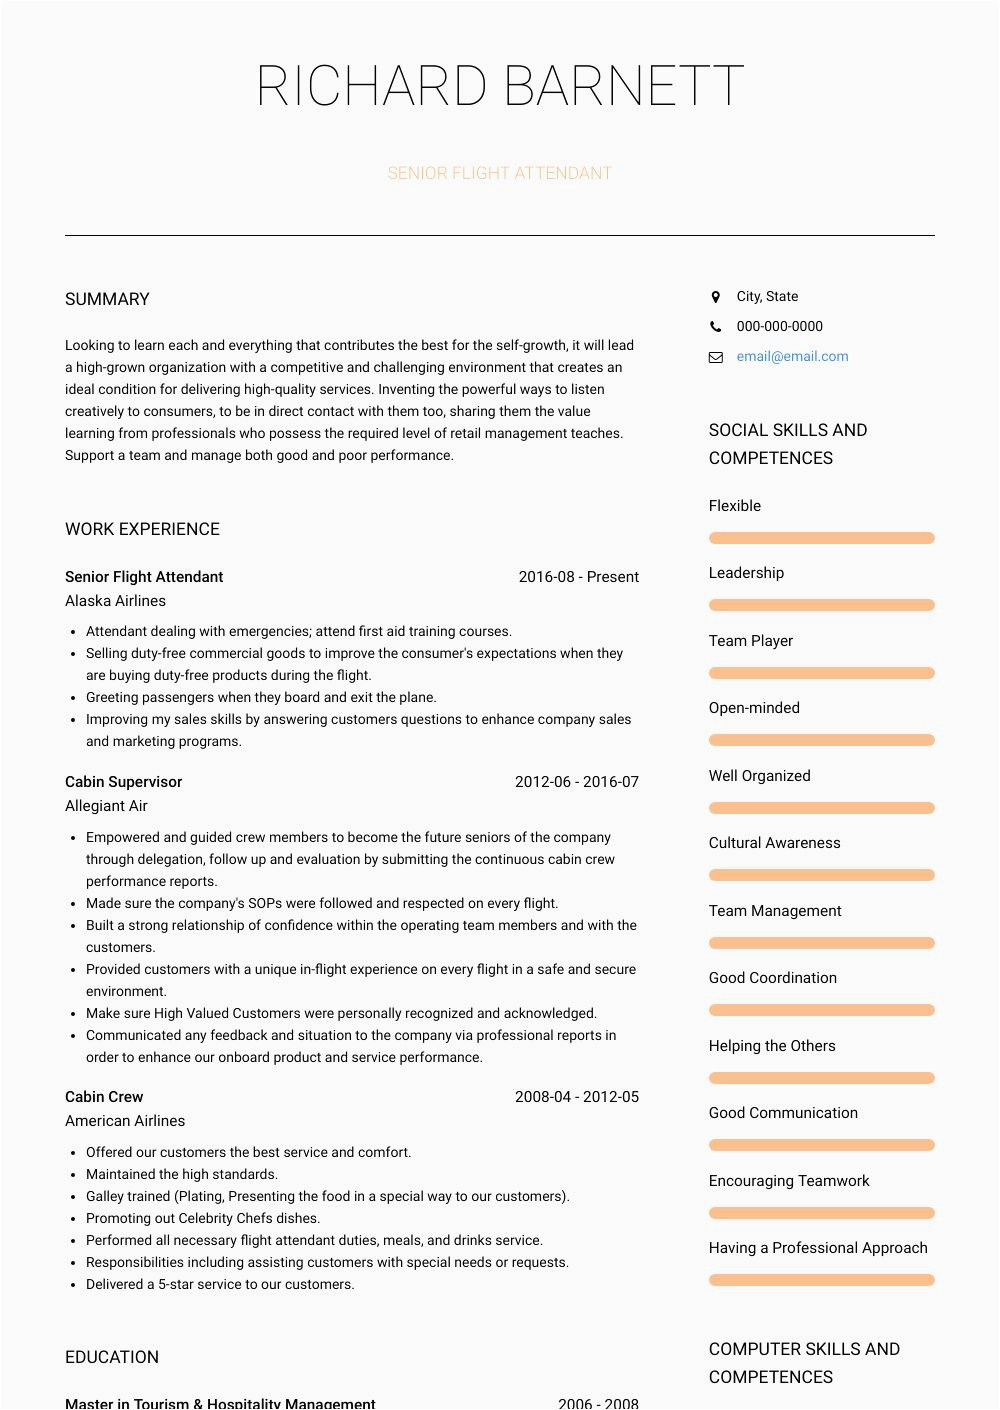 Sample Resume for A Customer for An Airplaneservice No Experience 25 Flight attendant Resume No Experience In 2020